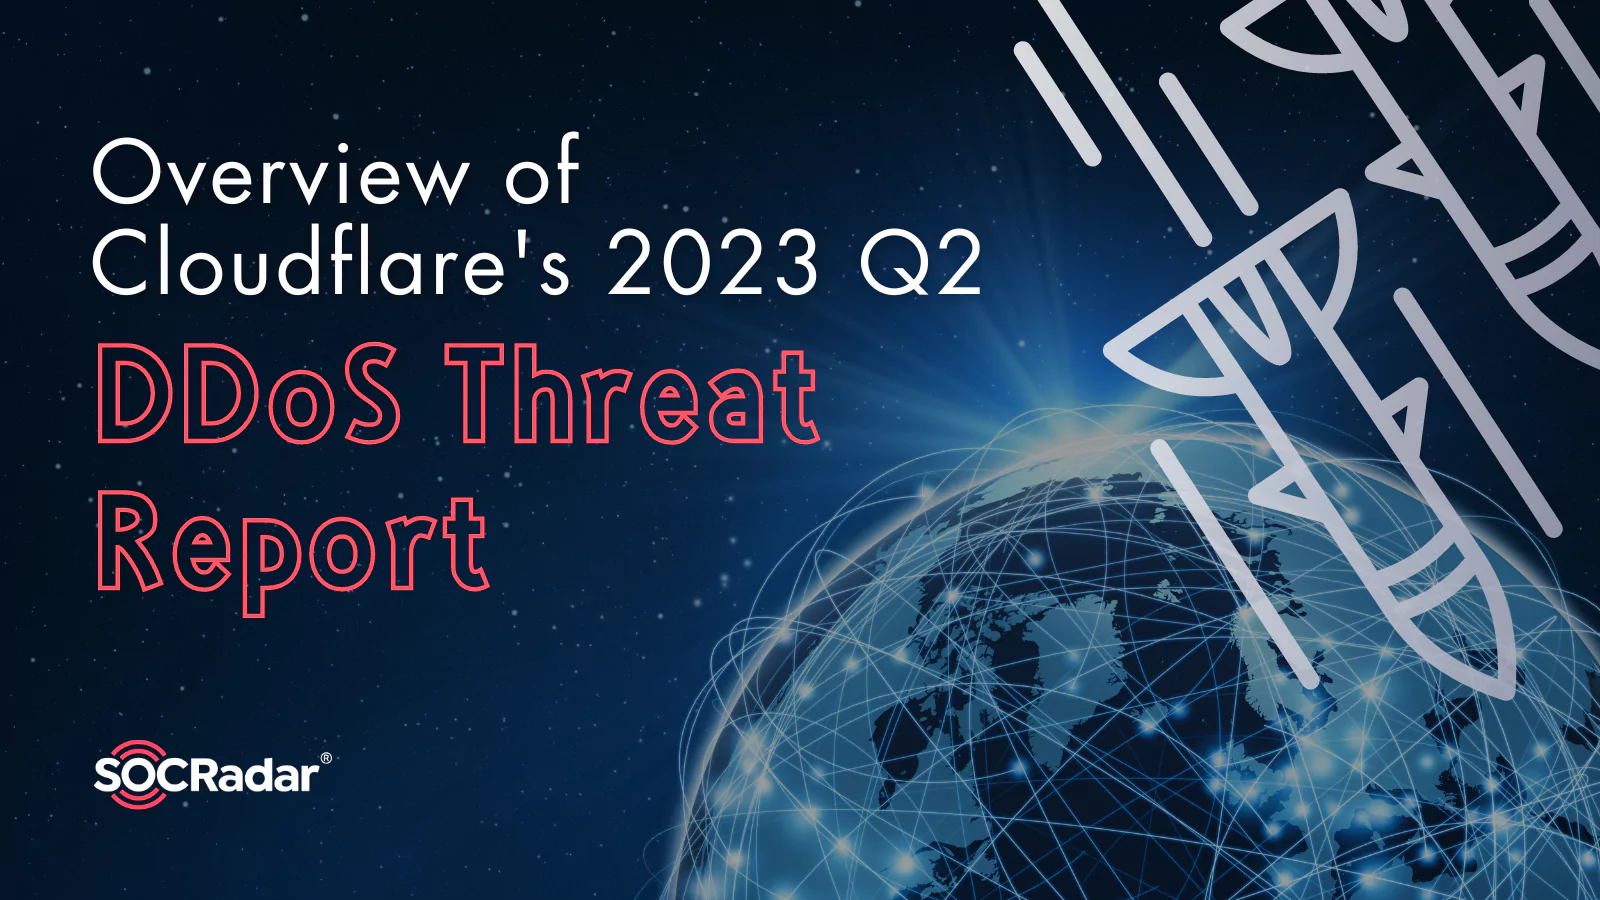 SOCRadar® Cyber Intelligence Inc. | Overview of Cloudflare’s 2023 Q2 DDoS Threat Report